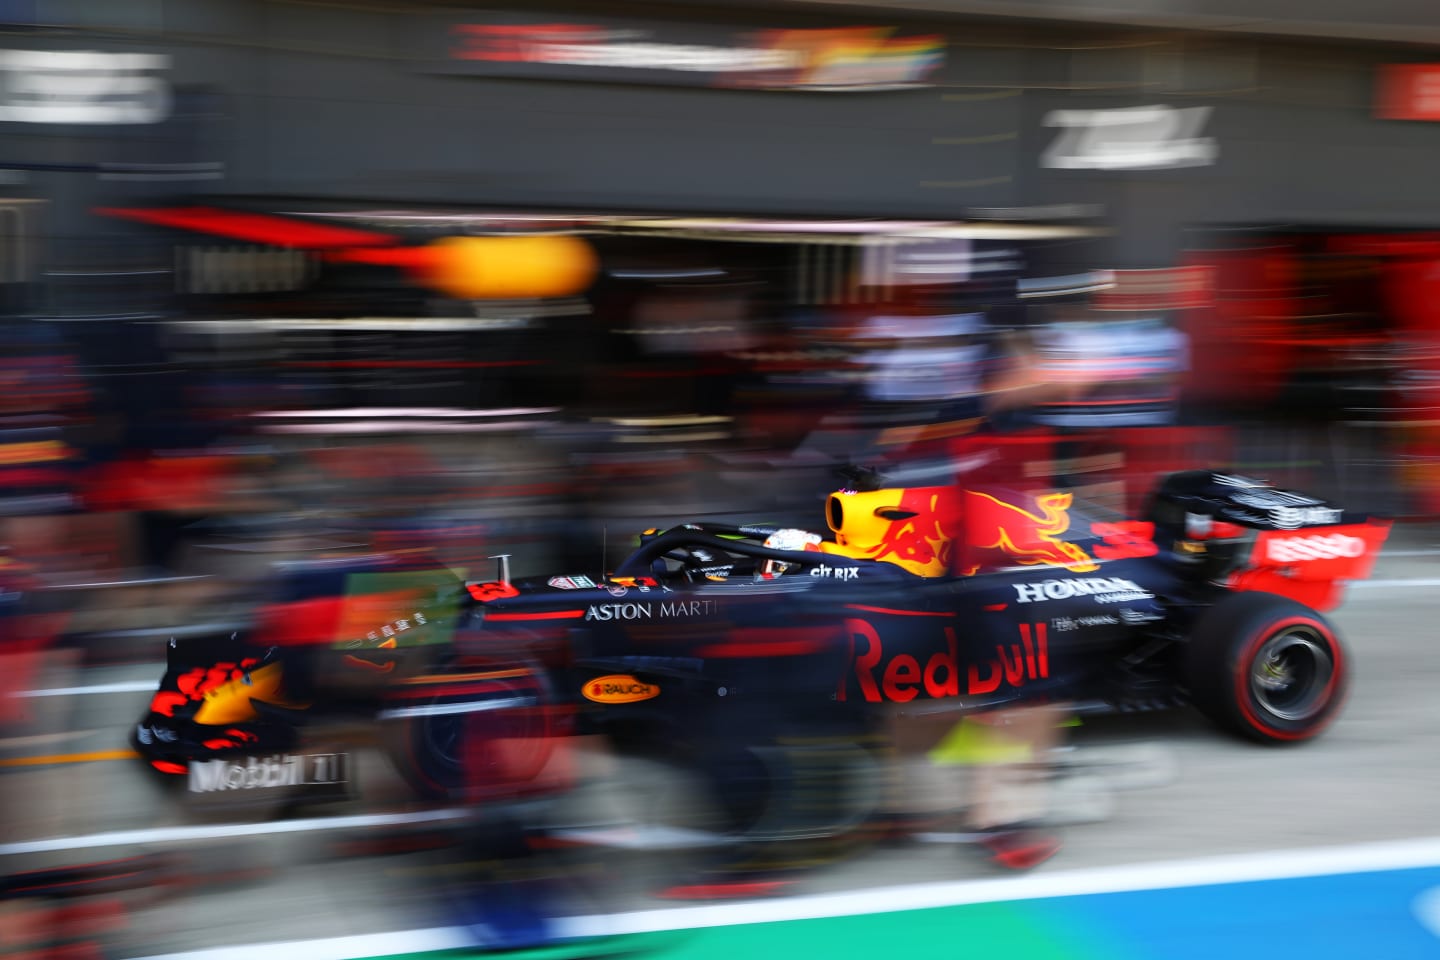 NORTHAMPTON, ENGLAND - JULY 31: Max Verstappen of the Netherlands driving the (33) Aston Martin Red Bull Racing RB16 stops in the Pitlane during practice for the F1 Grand Prix of Great Britain at Silverstone on July 31, 2020 in Northampton, England. (Photo by Mark Thompson/Getty Images,)